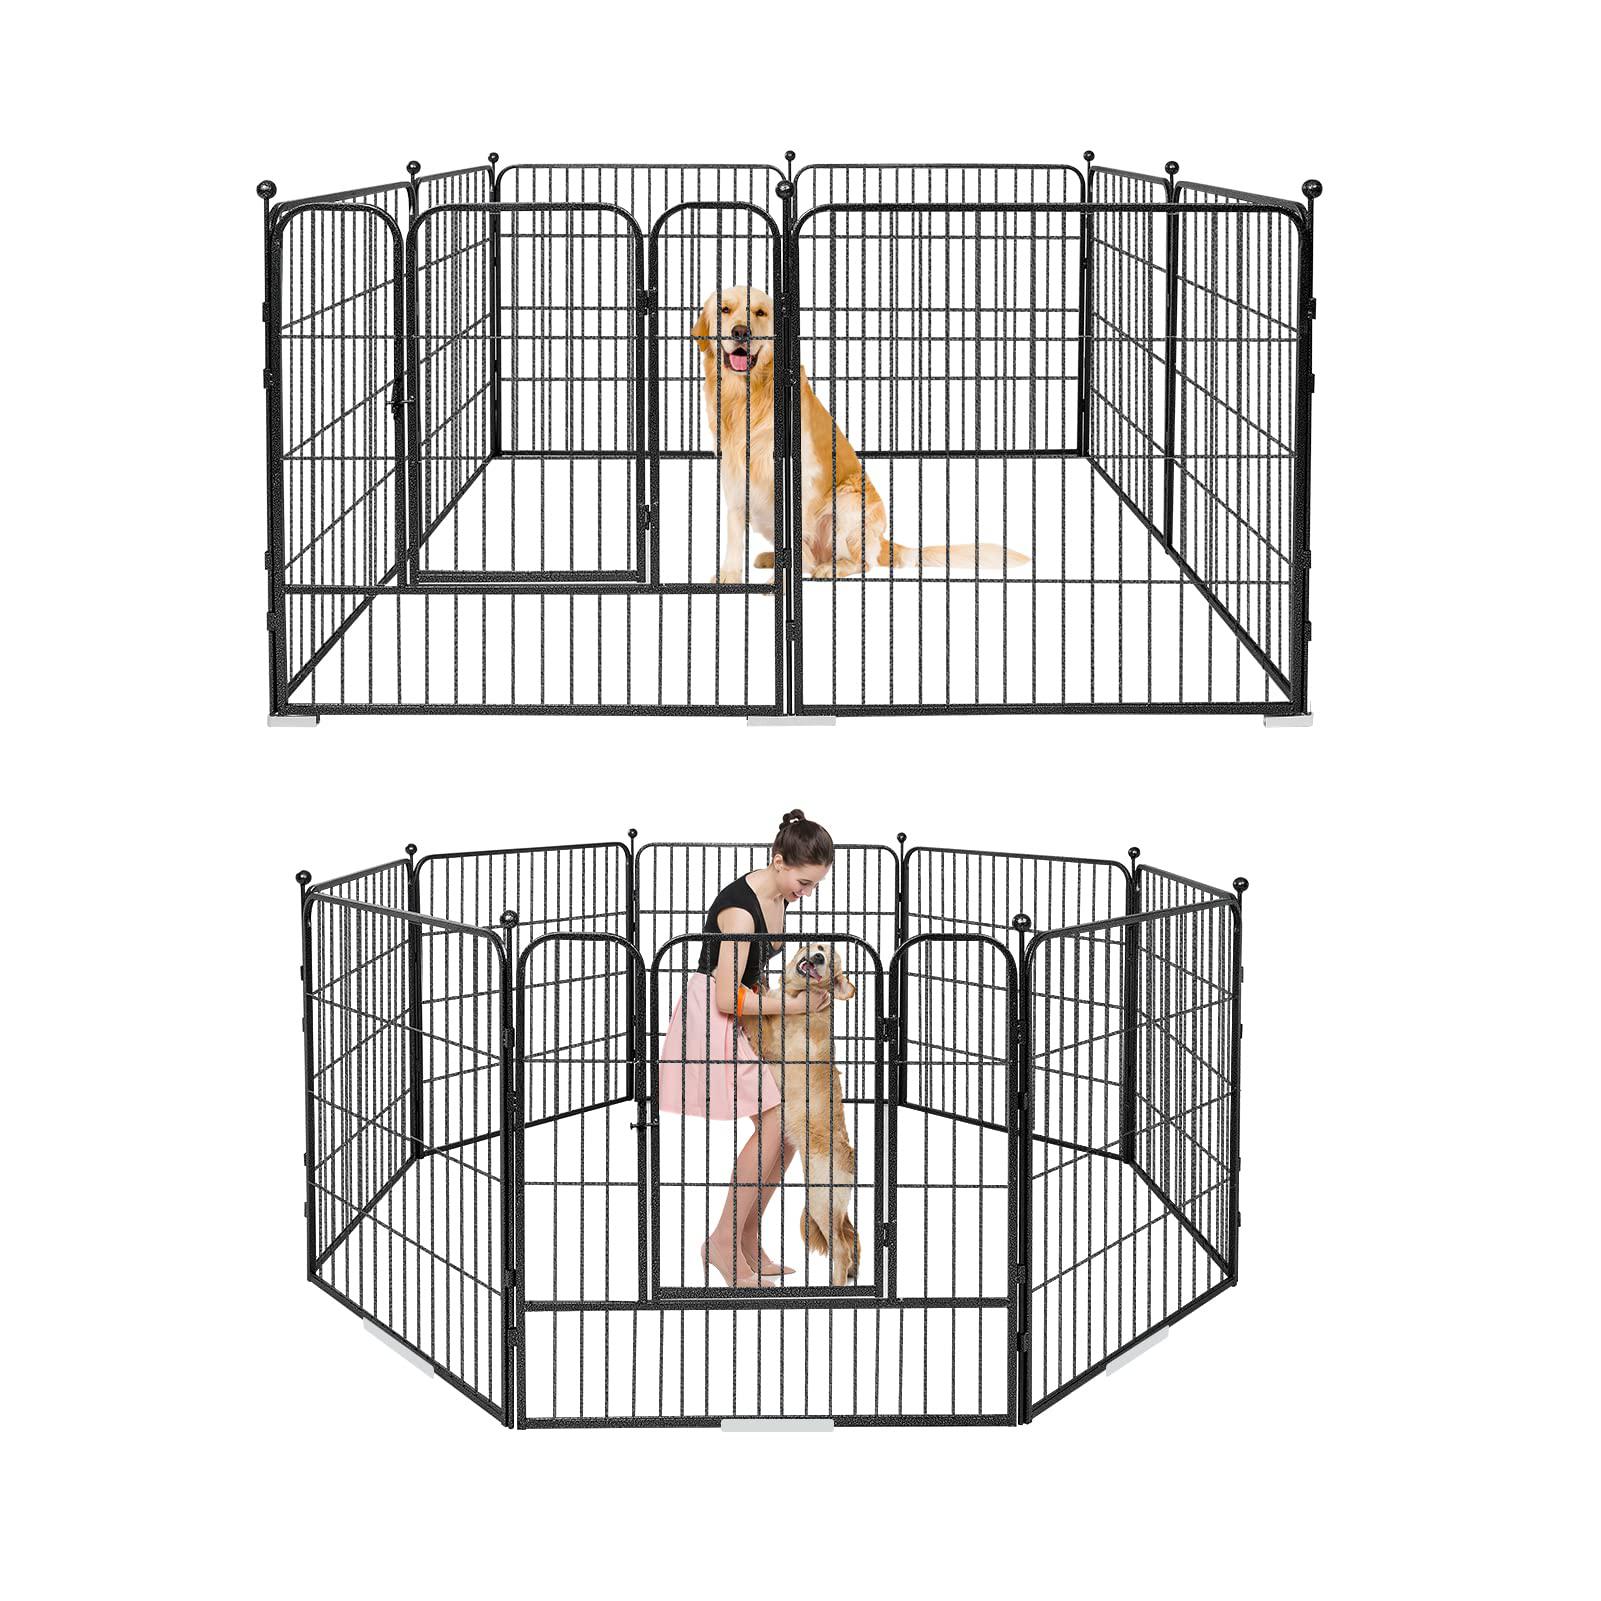 pantazo dog playpen outdoor/indoor 8 panels 32'' height dog pens heavy duty anti-rust material pet fence with door for large/